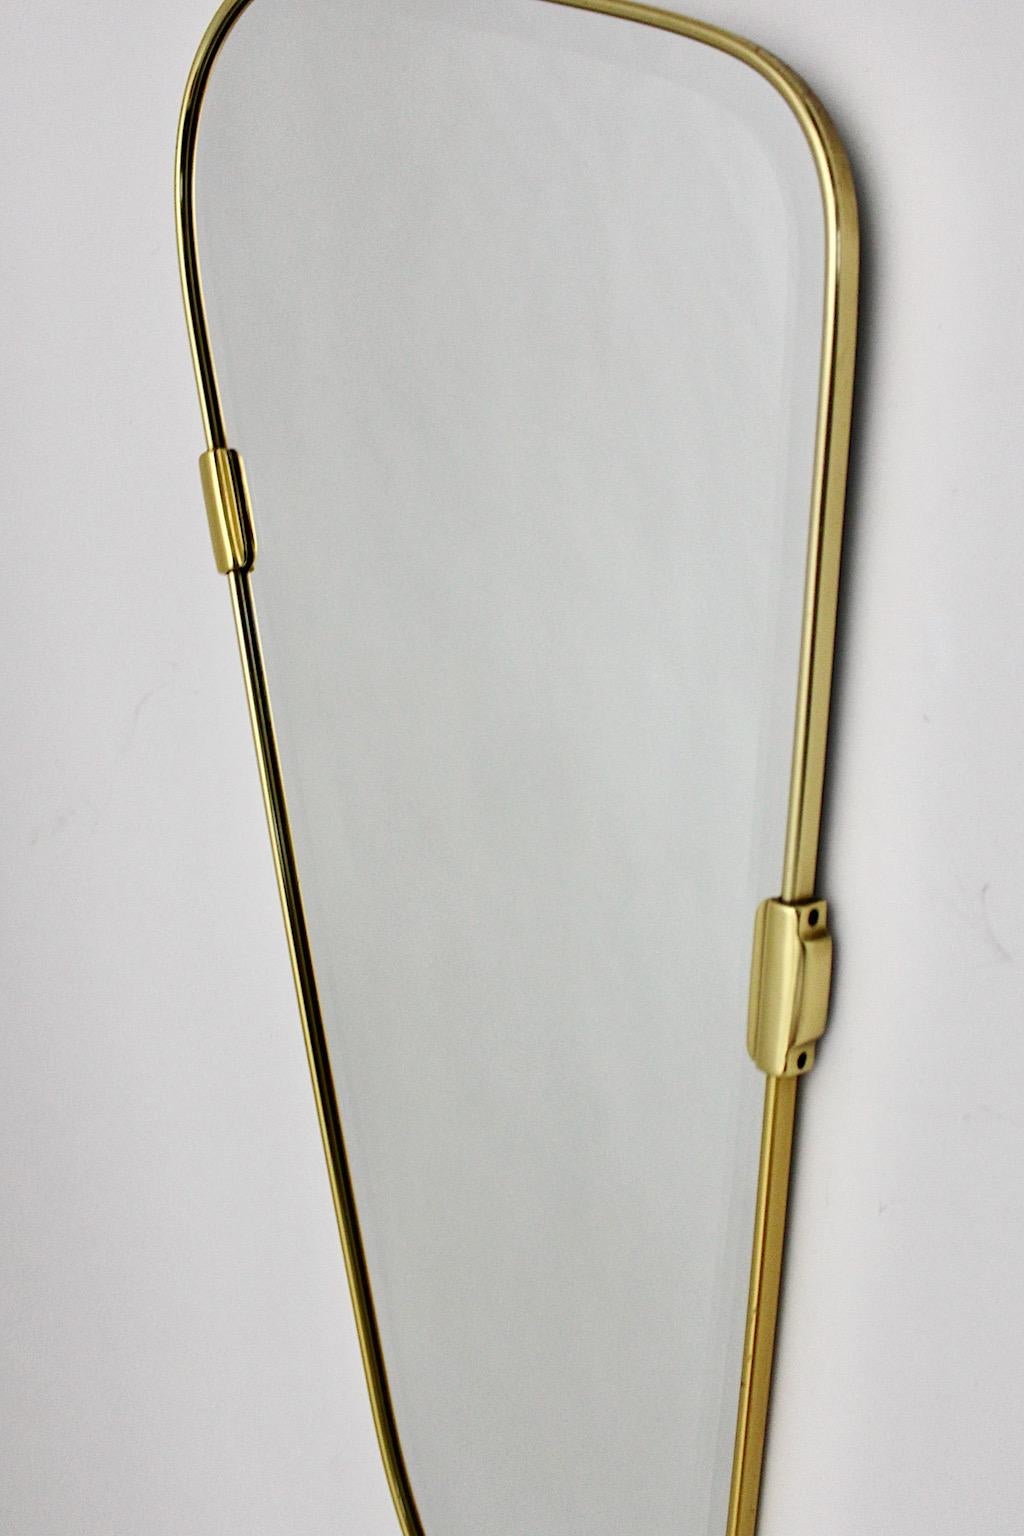 Mid Century Modern Vintage Oval Brass Wall Mirror Full Length Mirror 1950s Italy In Good Condition For Sale In Vienna, AT